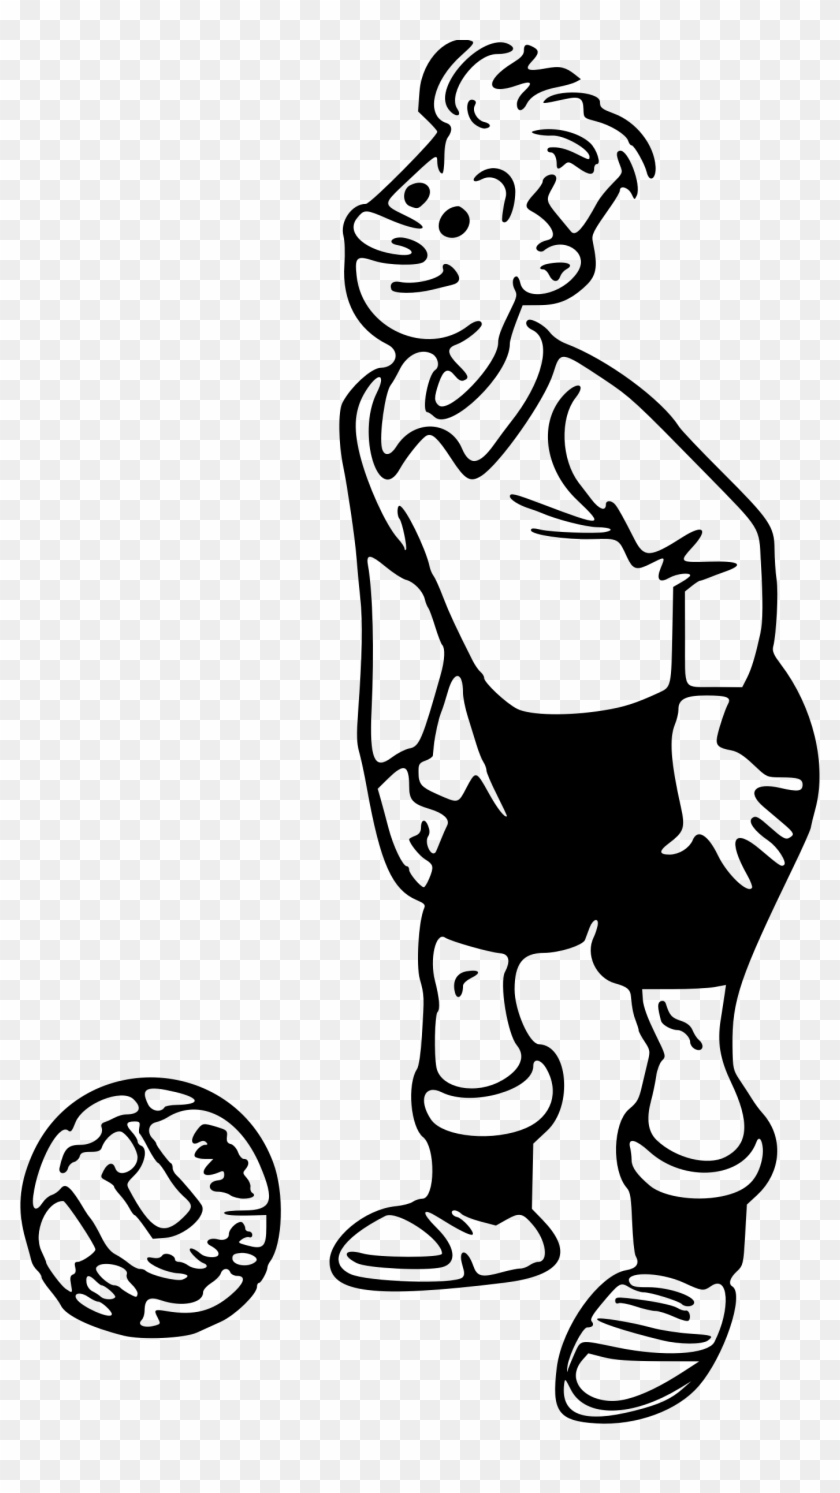 This Free Icons Png Design Of Soccer Player 2 Clipart